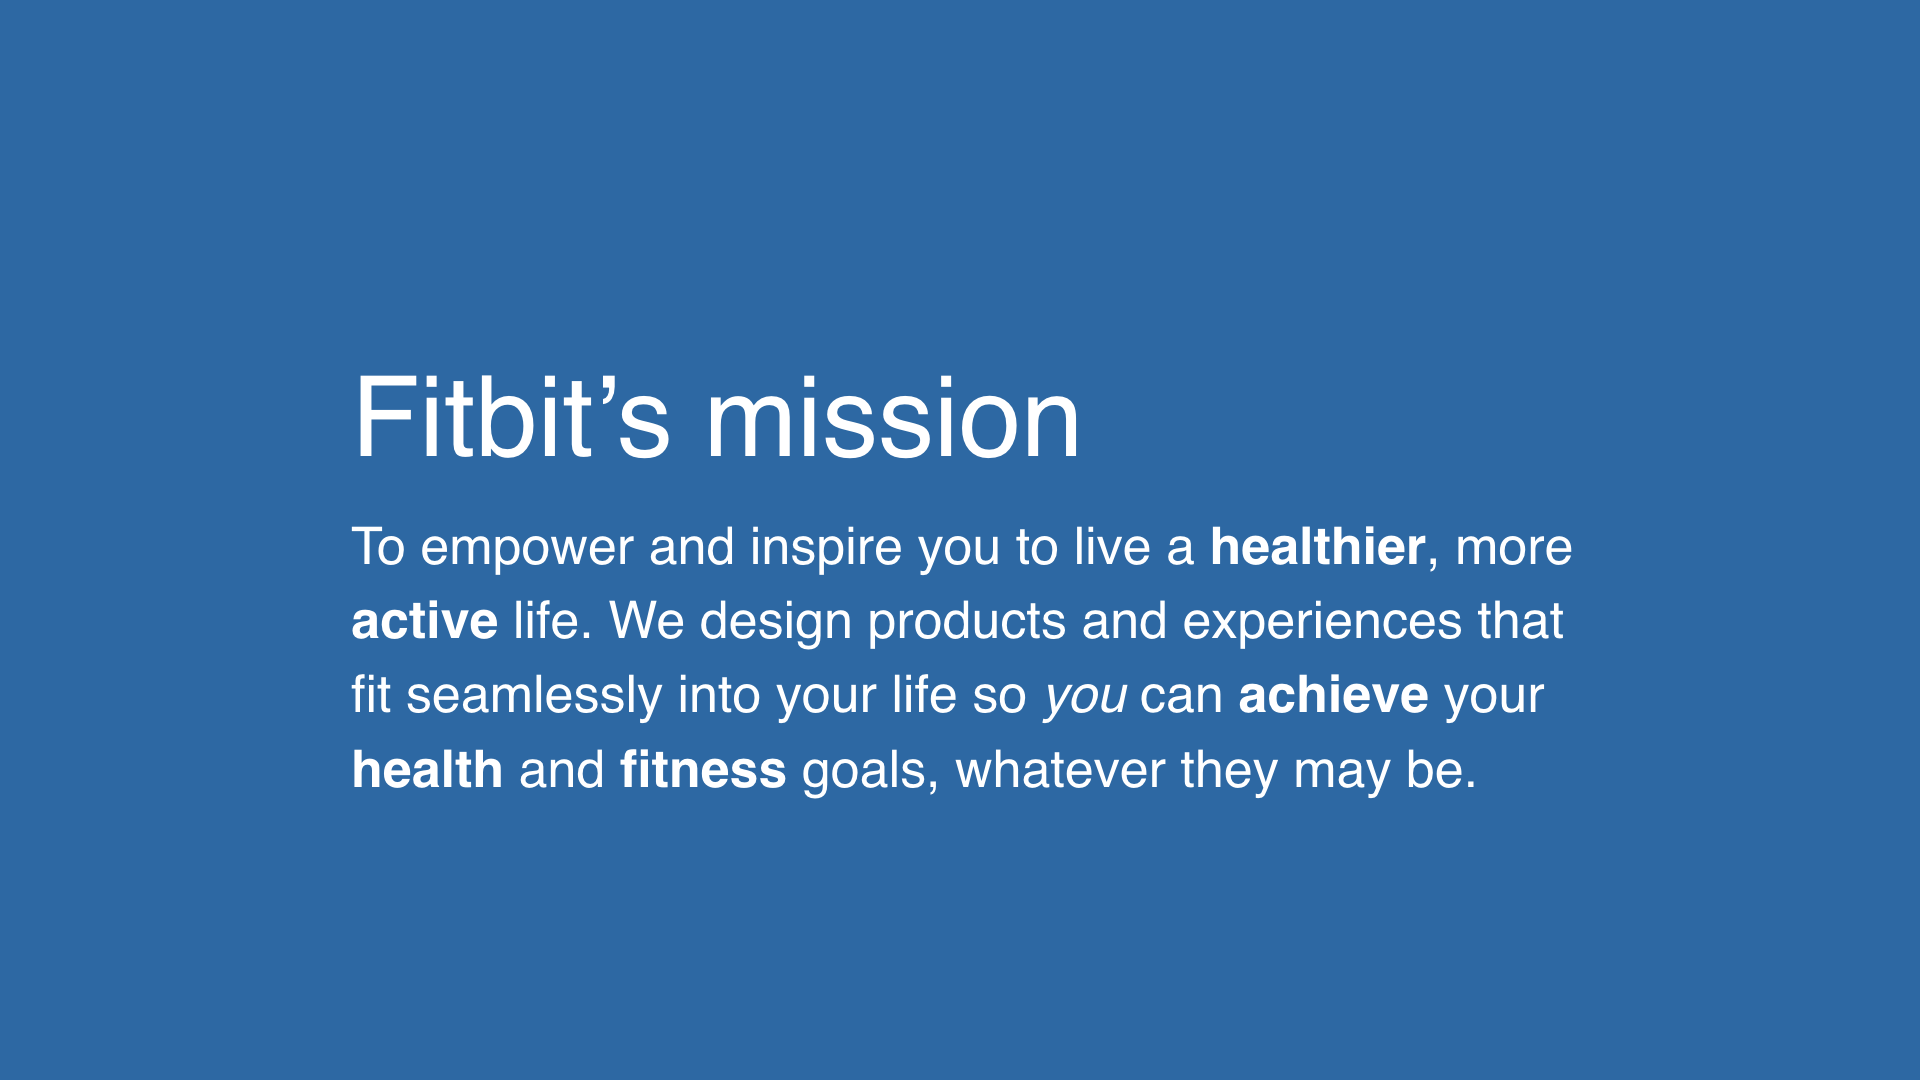 Text of Fitbit’s mission statement: to empower and inspire you to live a healthier, more active life. We design products and experiences that fit seamlessly into your life so you can achieve your health and fitness goals, whatever they may be.